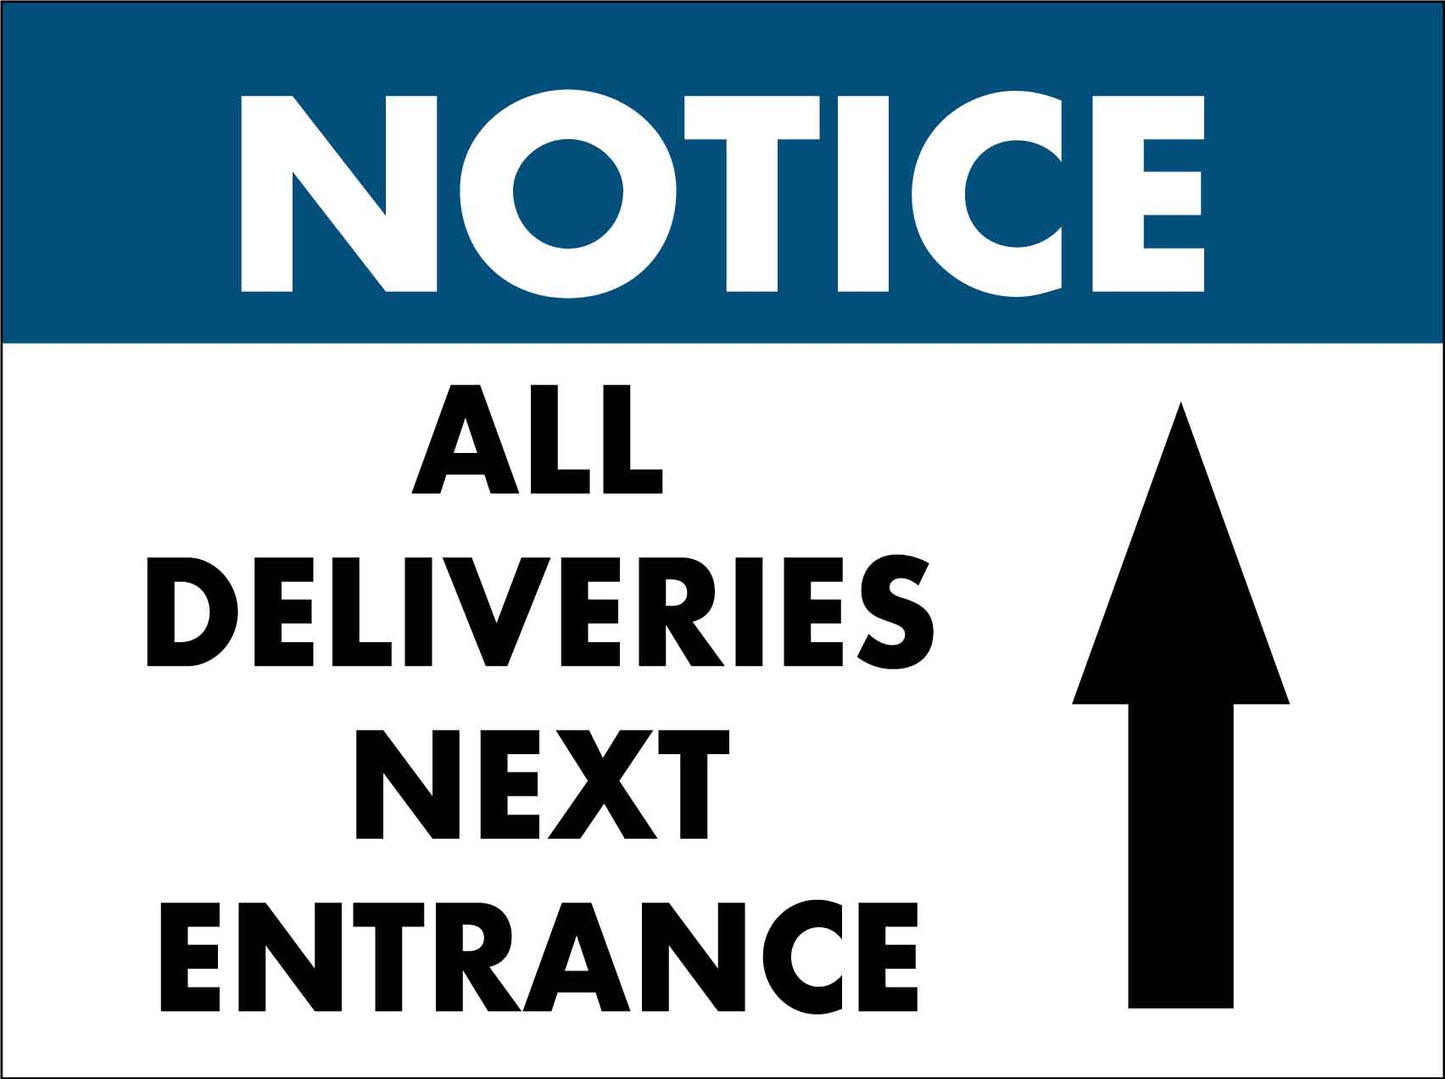 Notice All Deliveries Next Entrance - Arrow Straight Sign